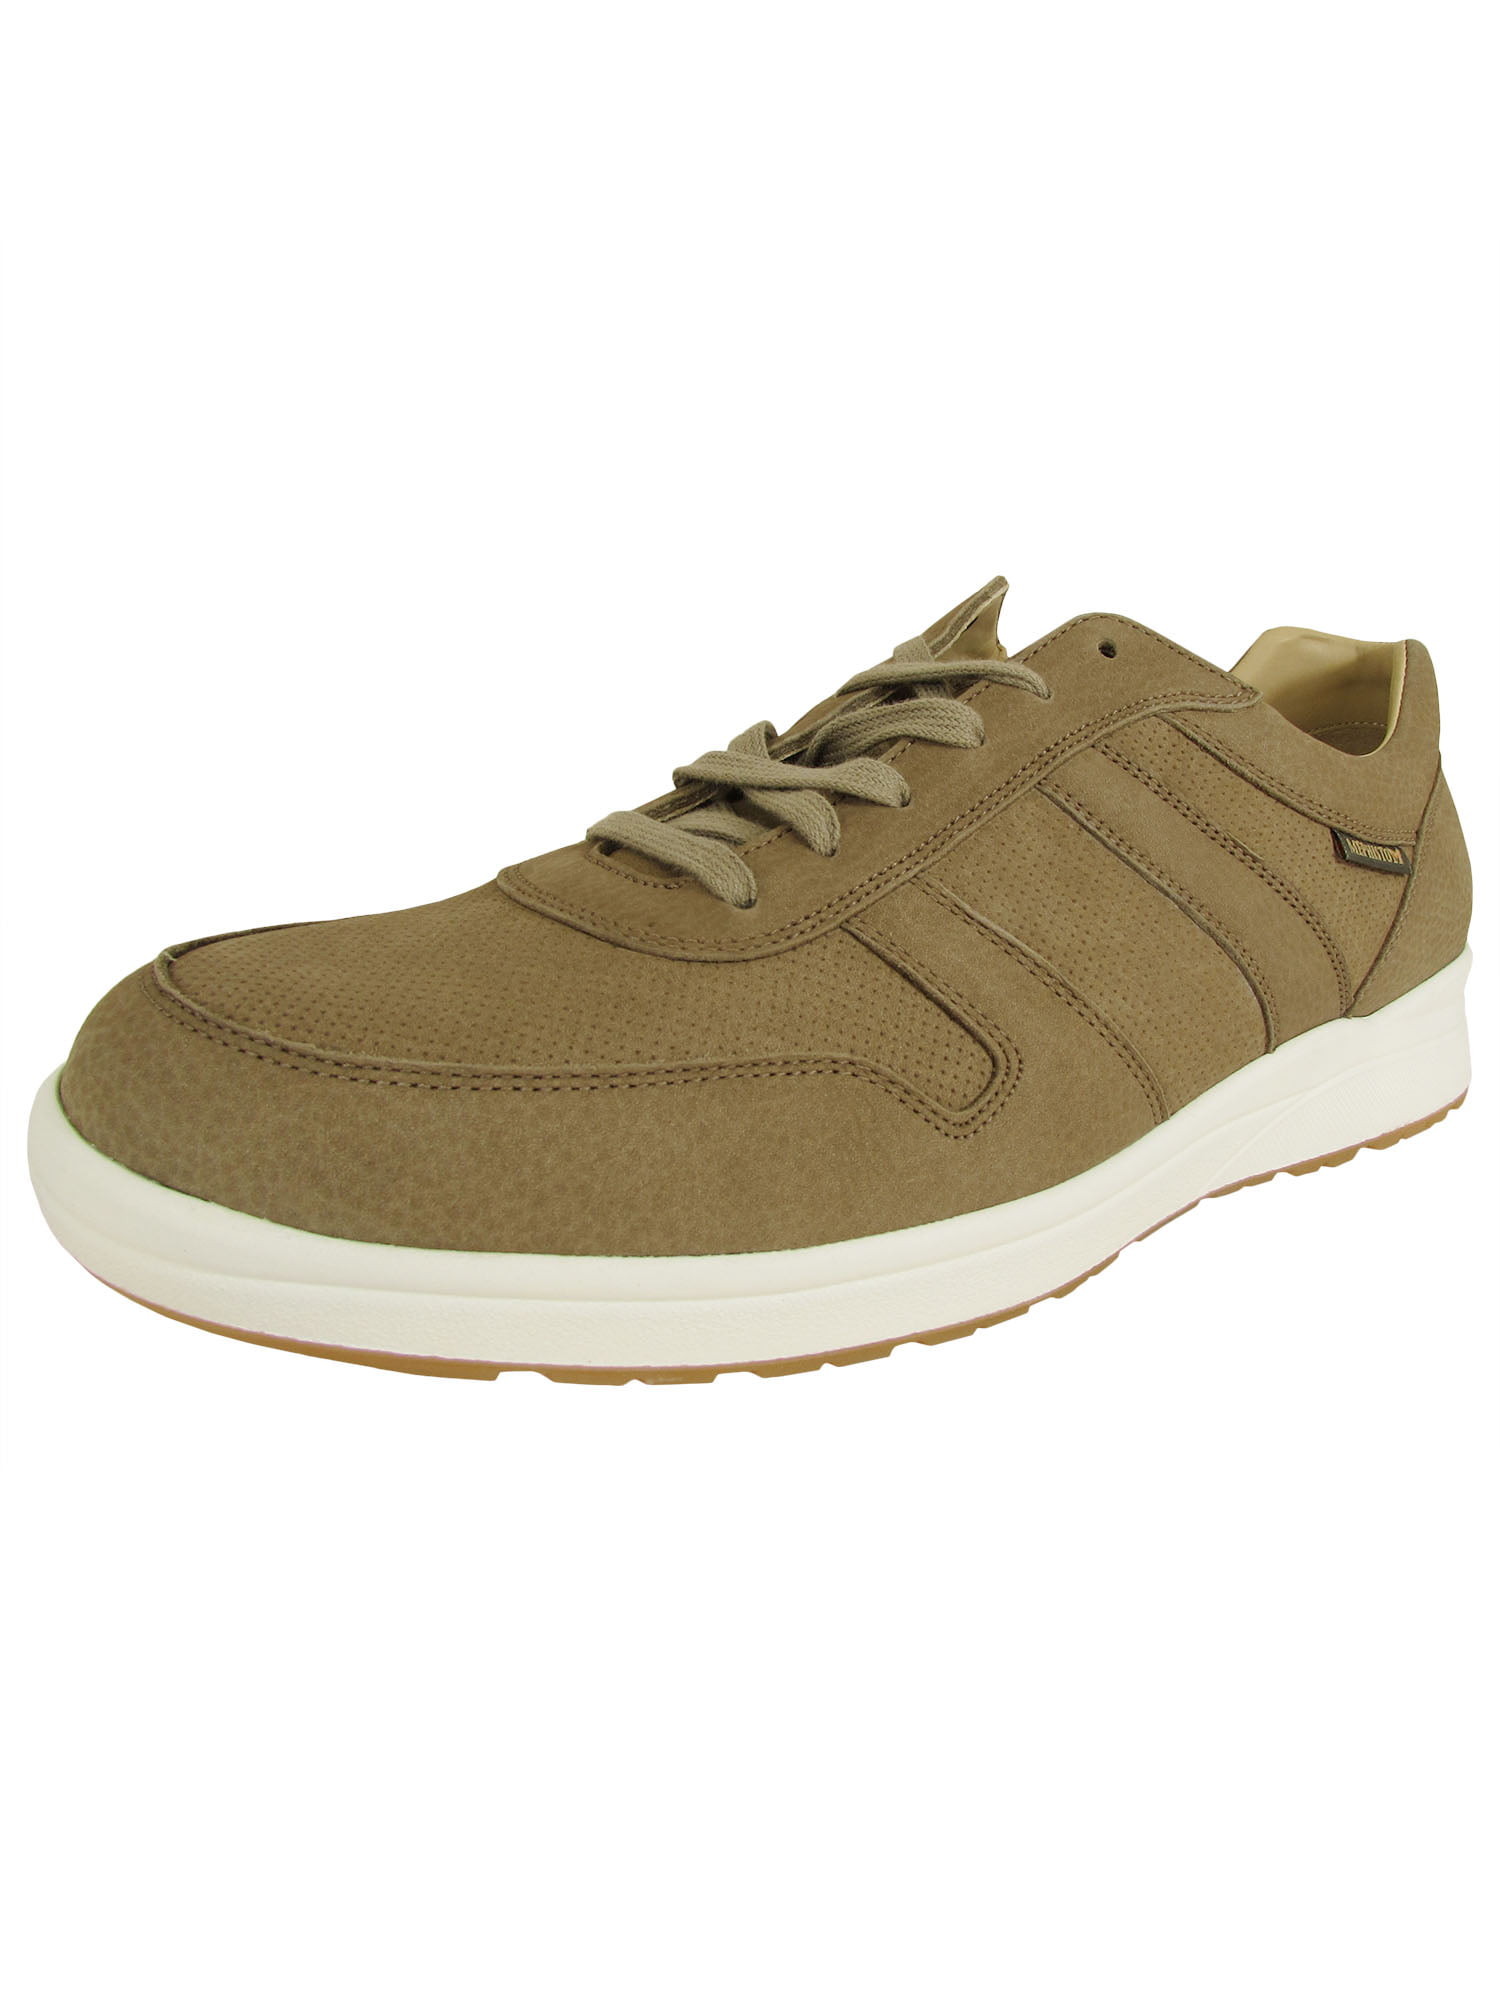 Mephisto - Mephisto Mens Vito Perf Lace Up Sneaker Shoes, Sand, US 12.5 ...